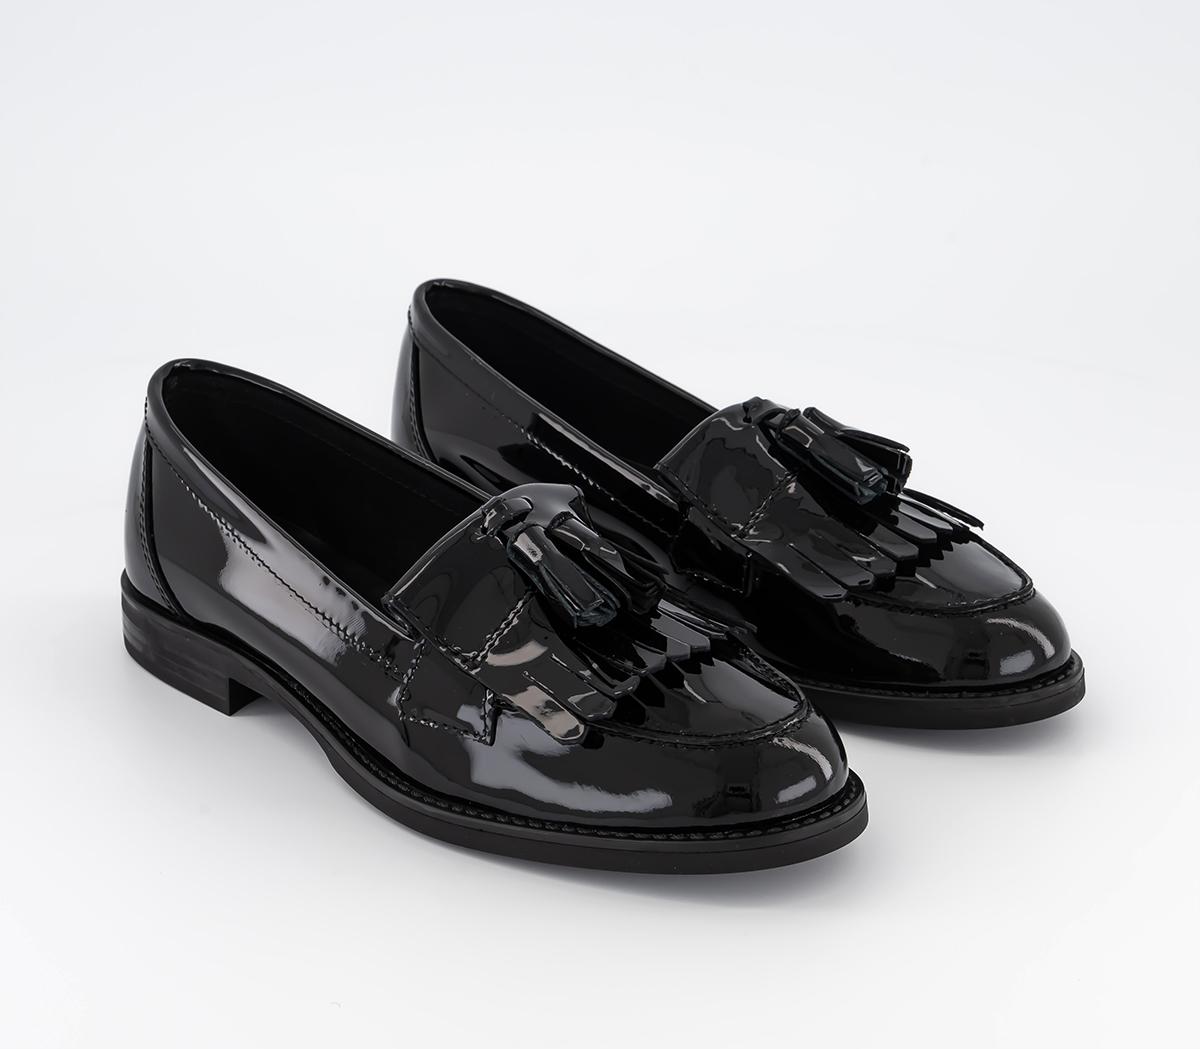 OFFICE Womens Fitz Tassle Fringe Loafers Black Patent Leather, 5